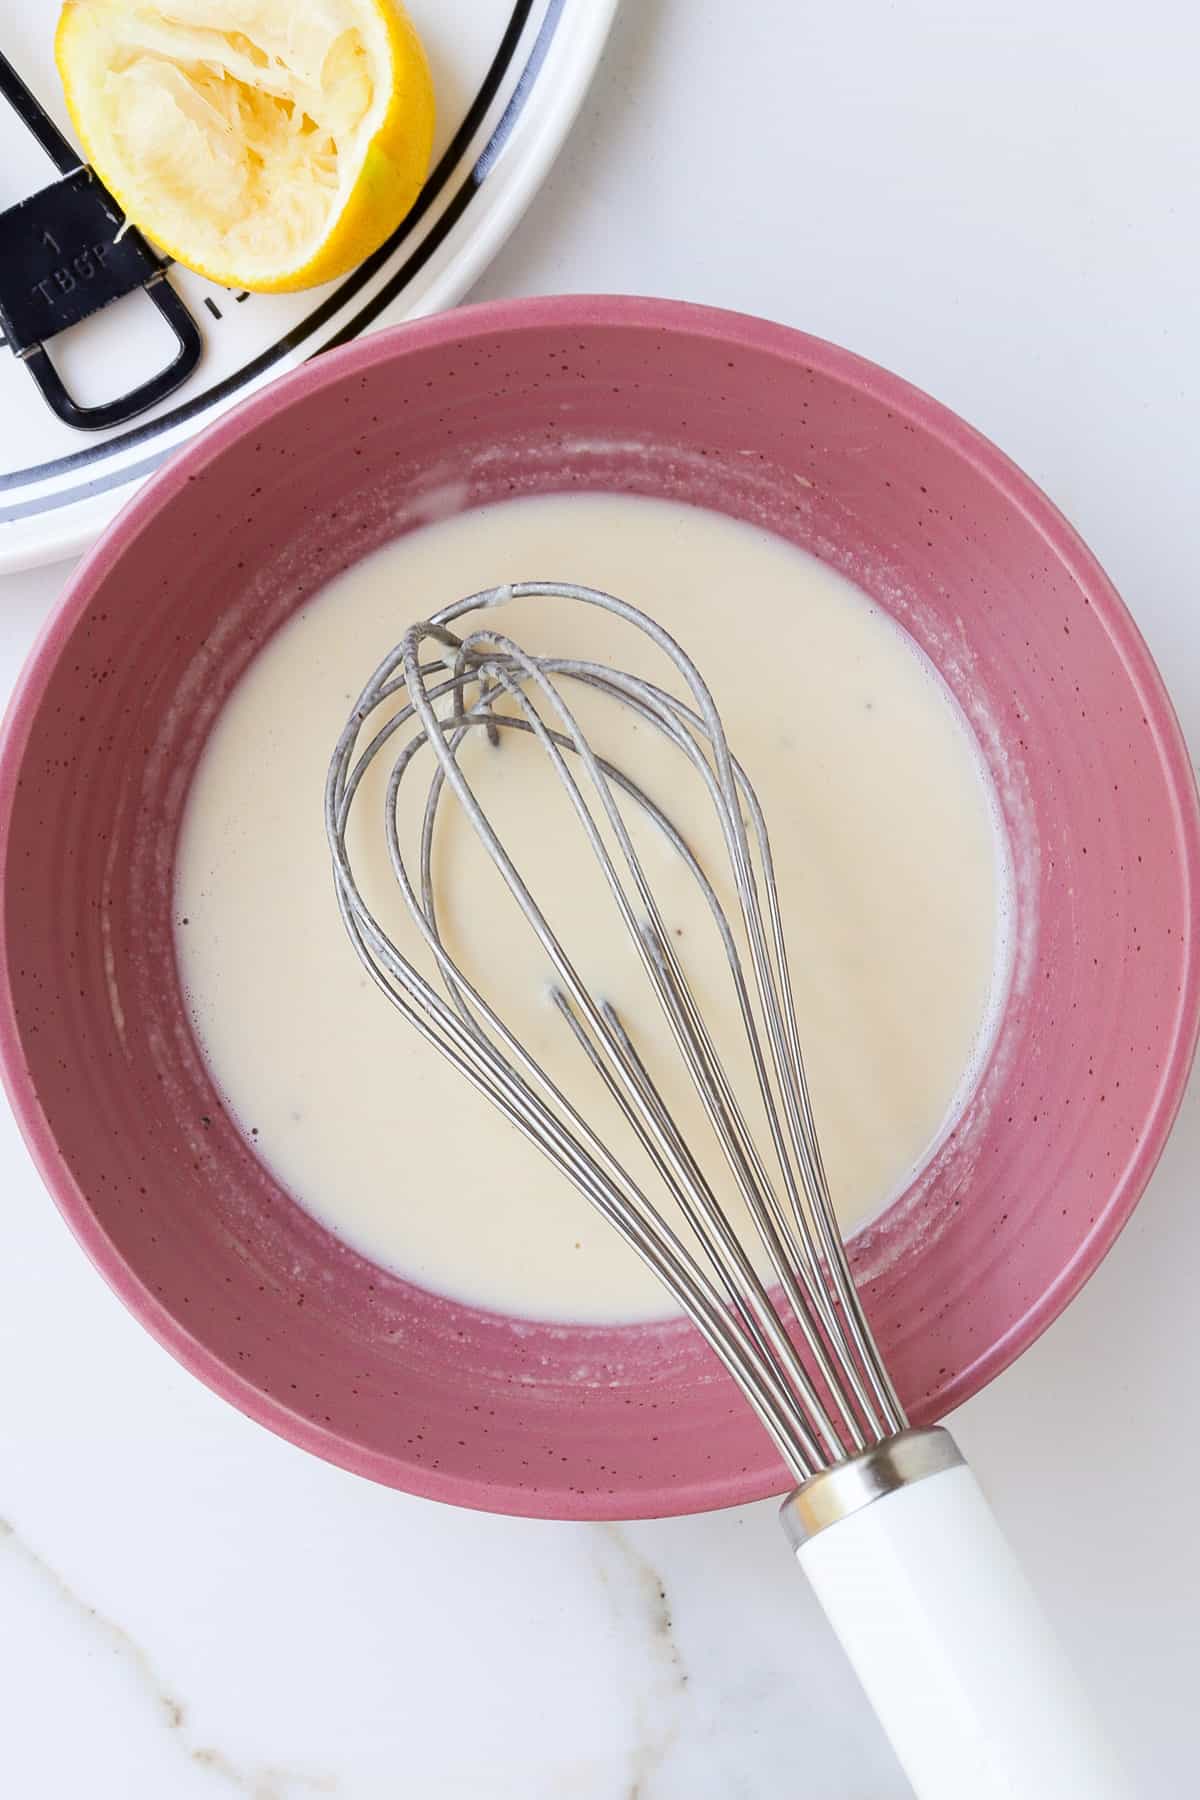 Lemon tahini dressing in a pink bowl with a whisk.